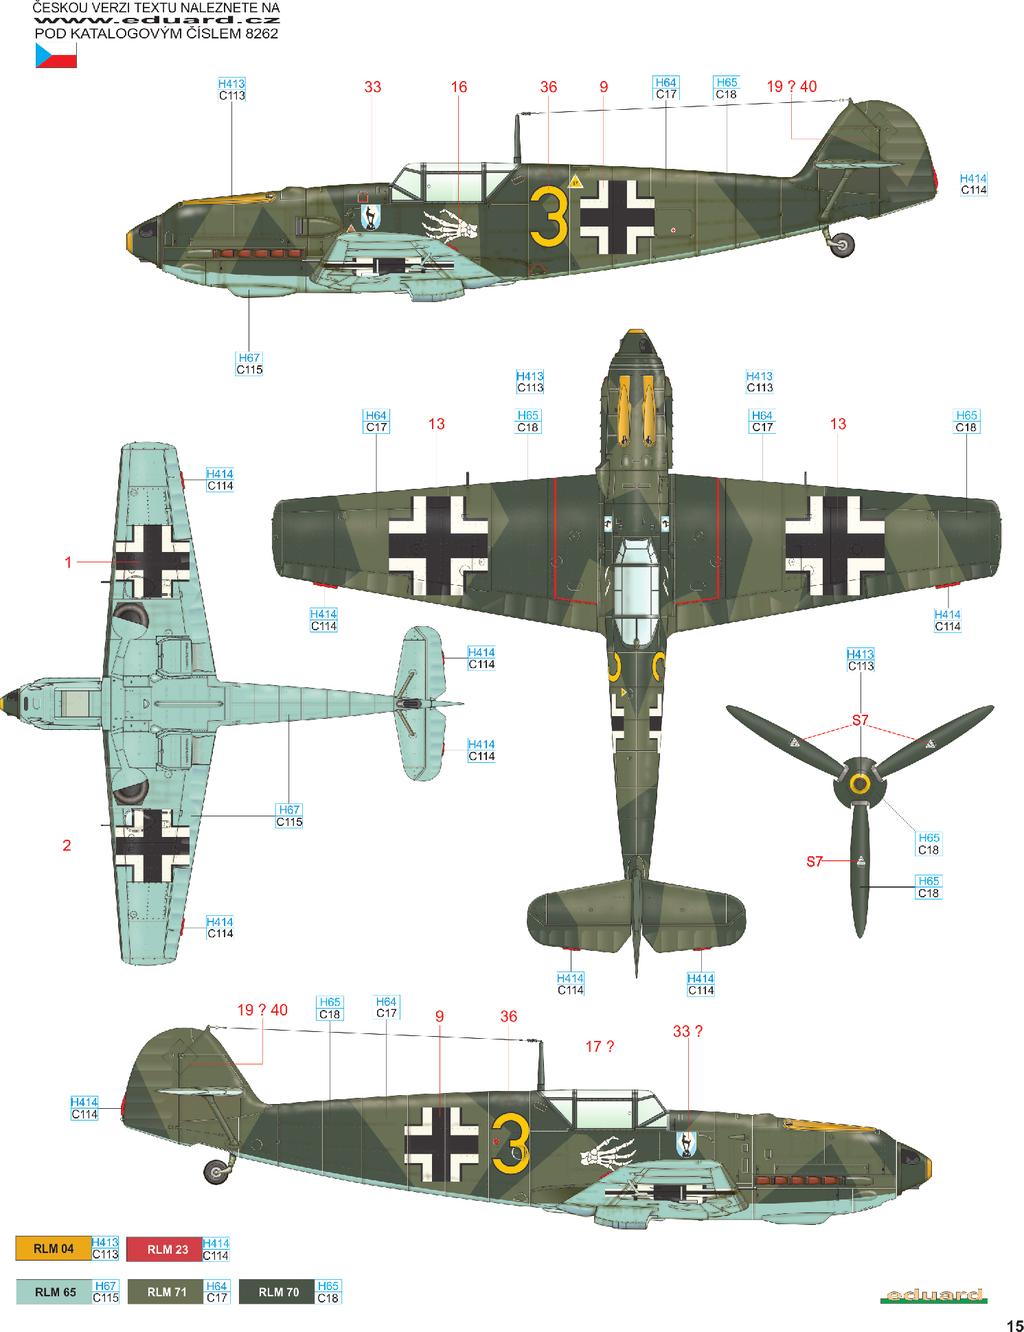 E 3./JG 51, Mannheim-Sandhofen, Winter 1939-1940 The illustrated aircraft is an example of the camouflage scheme and national marking application introduced at the end of 1939, specifically during